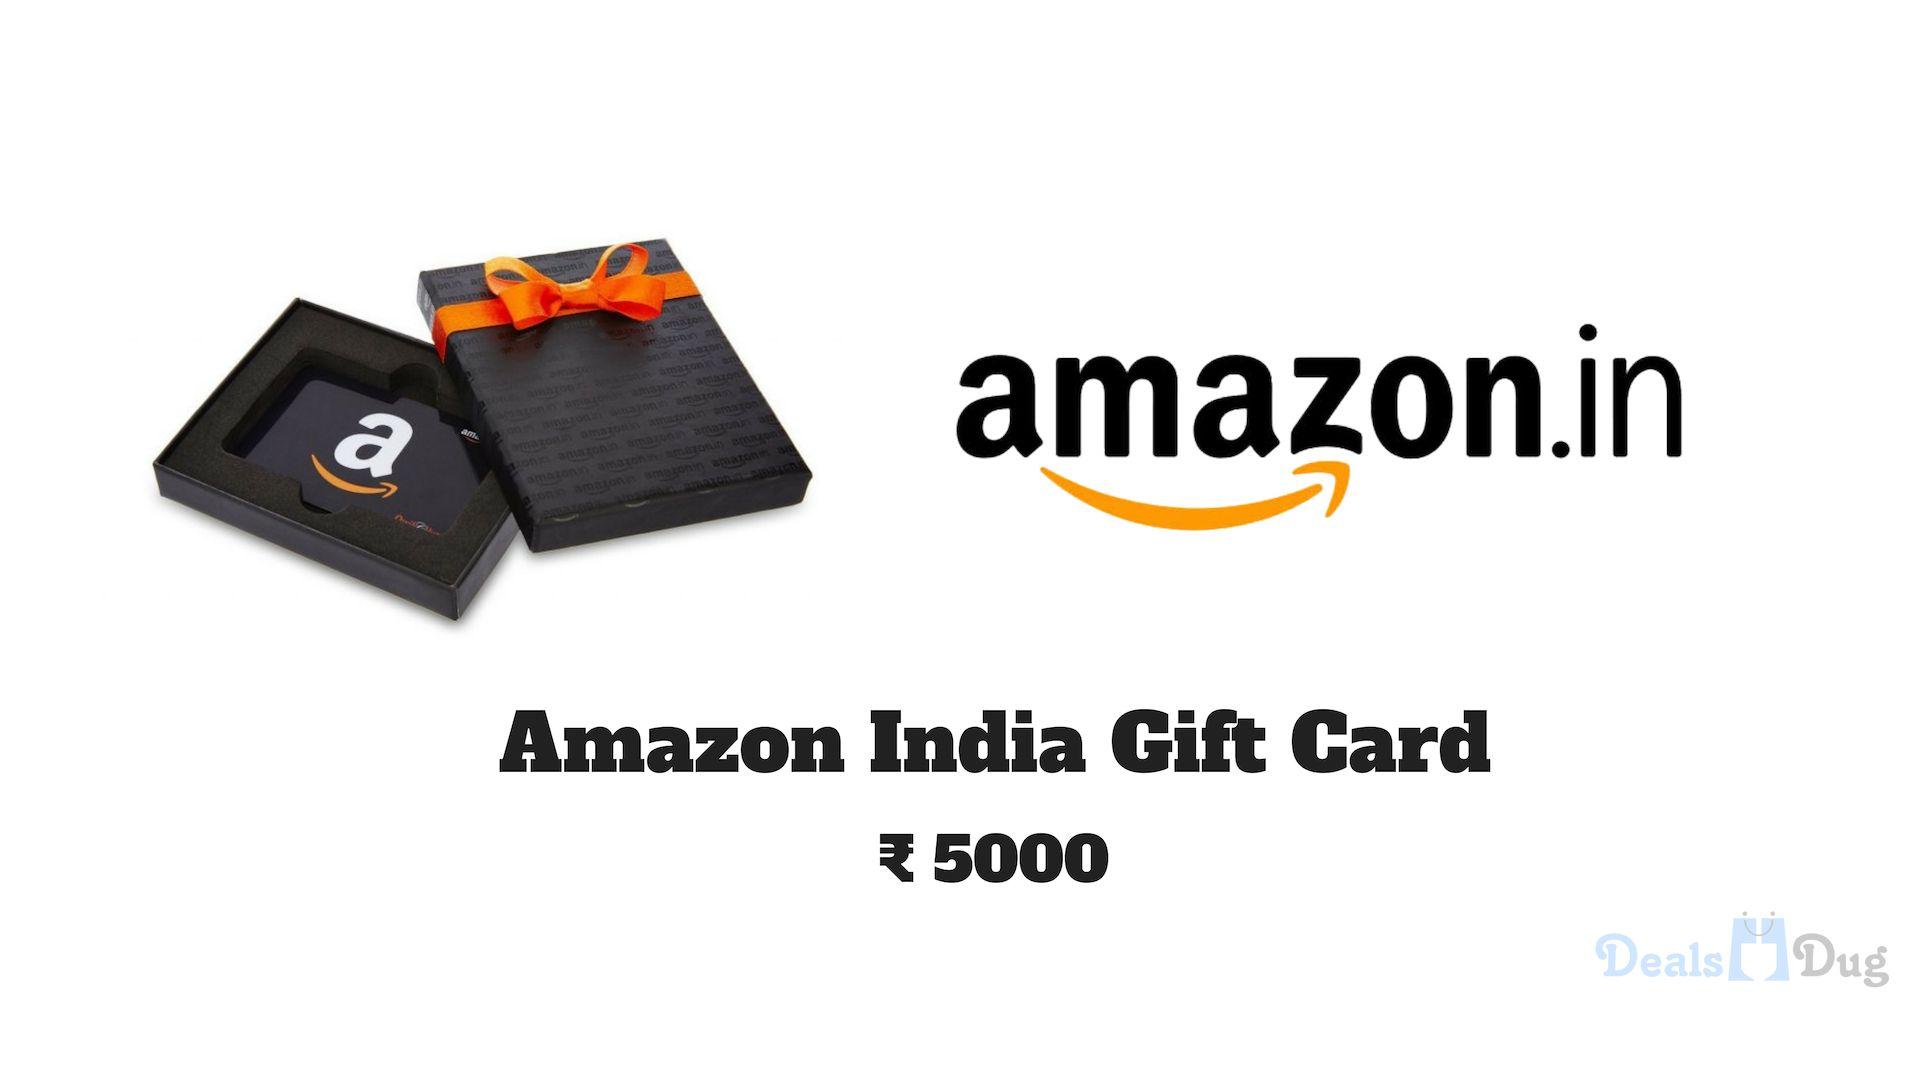 Personalized Gift Cards Store: Buy Personalized Gift Cards Online at Best  Prices in India | Browse list of Personalized Gift Cards at Amazon.in